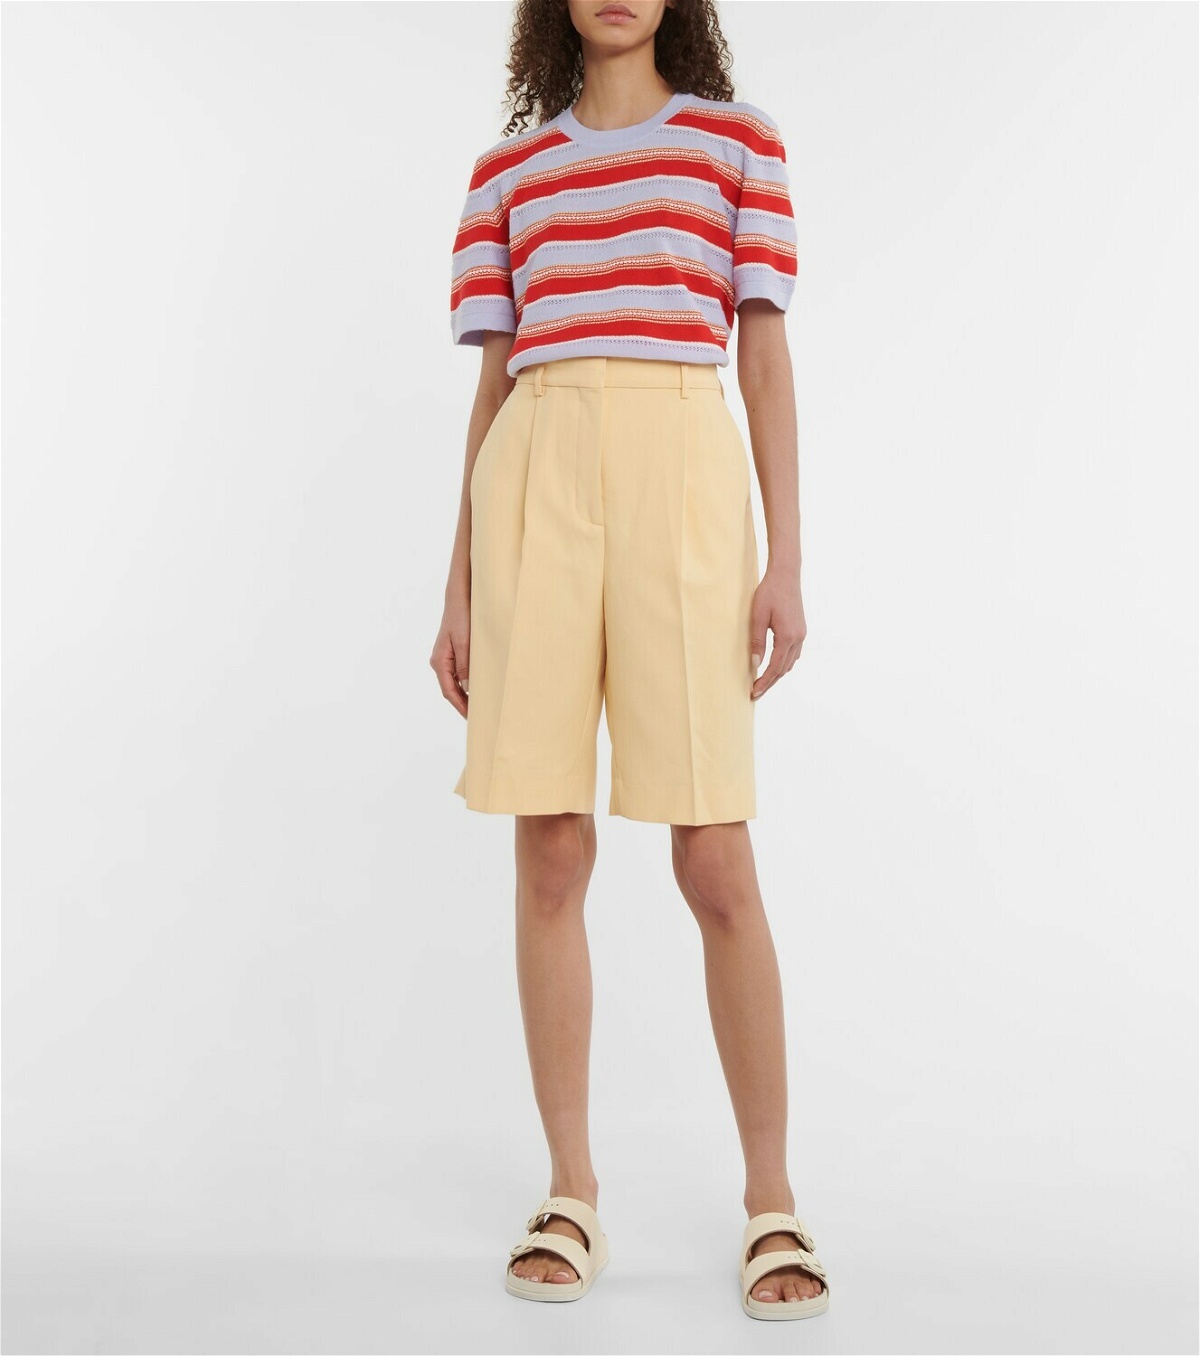 Barrie Striped cotton and cashmere top